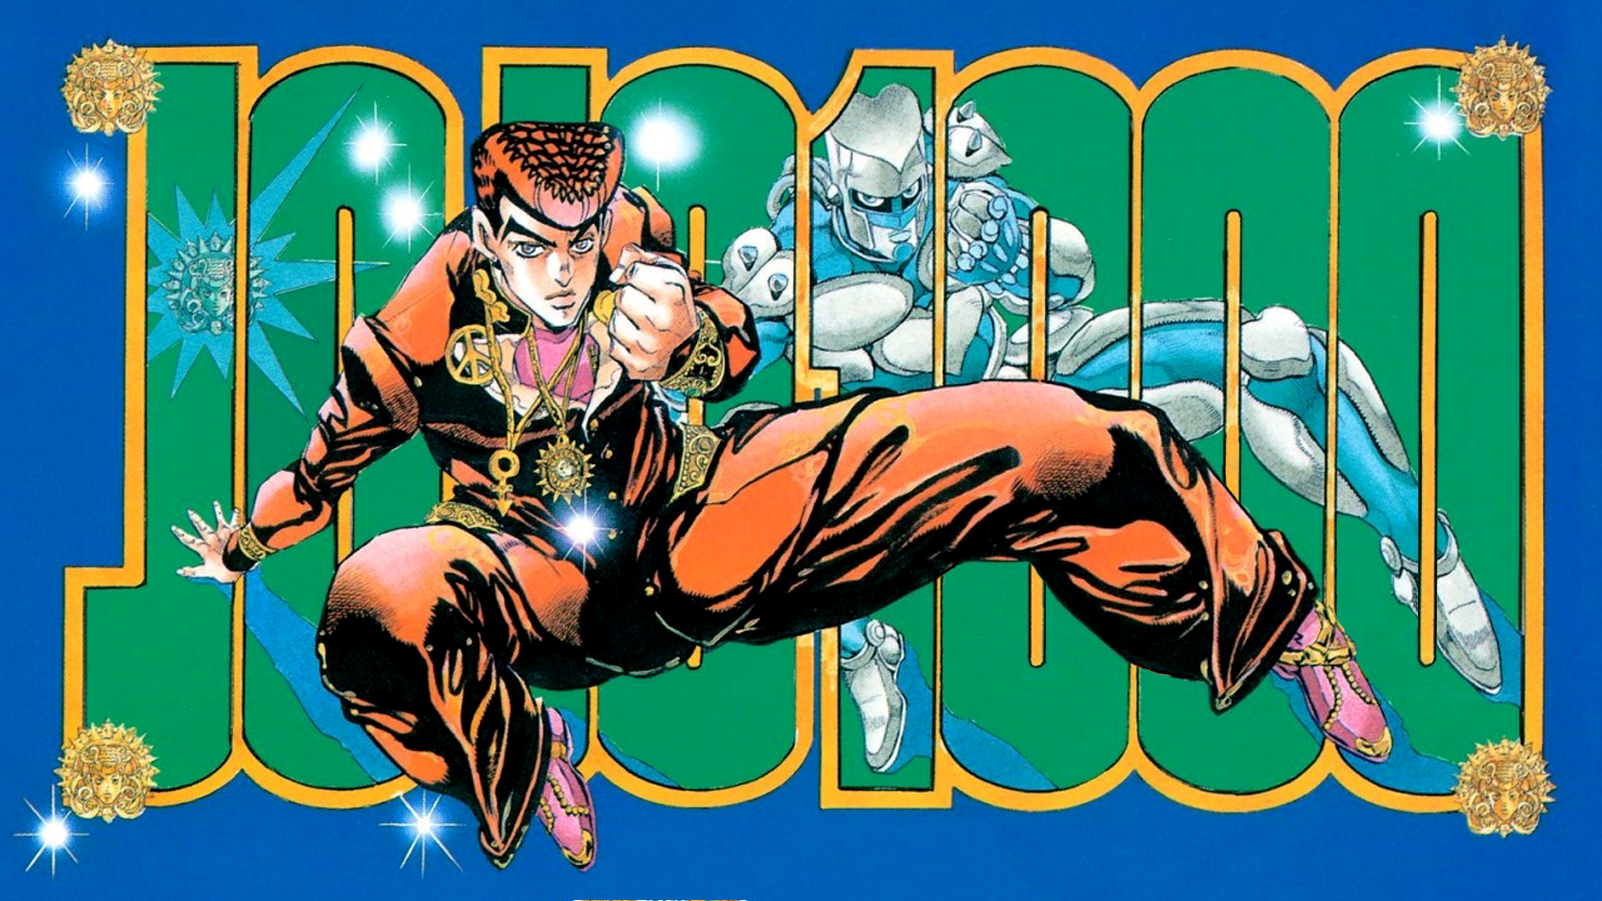 Posting a wallpaper a day until stone ocean is animated day 194: JOJO 1000 Members!